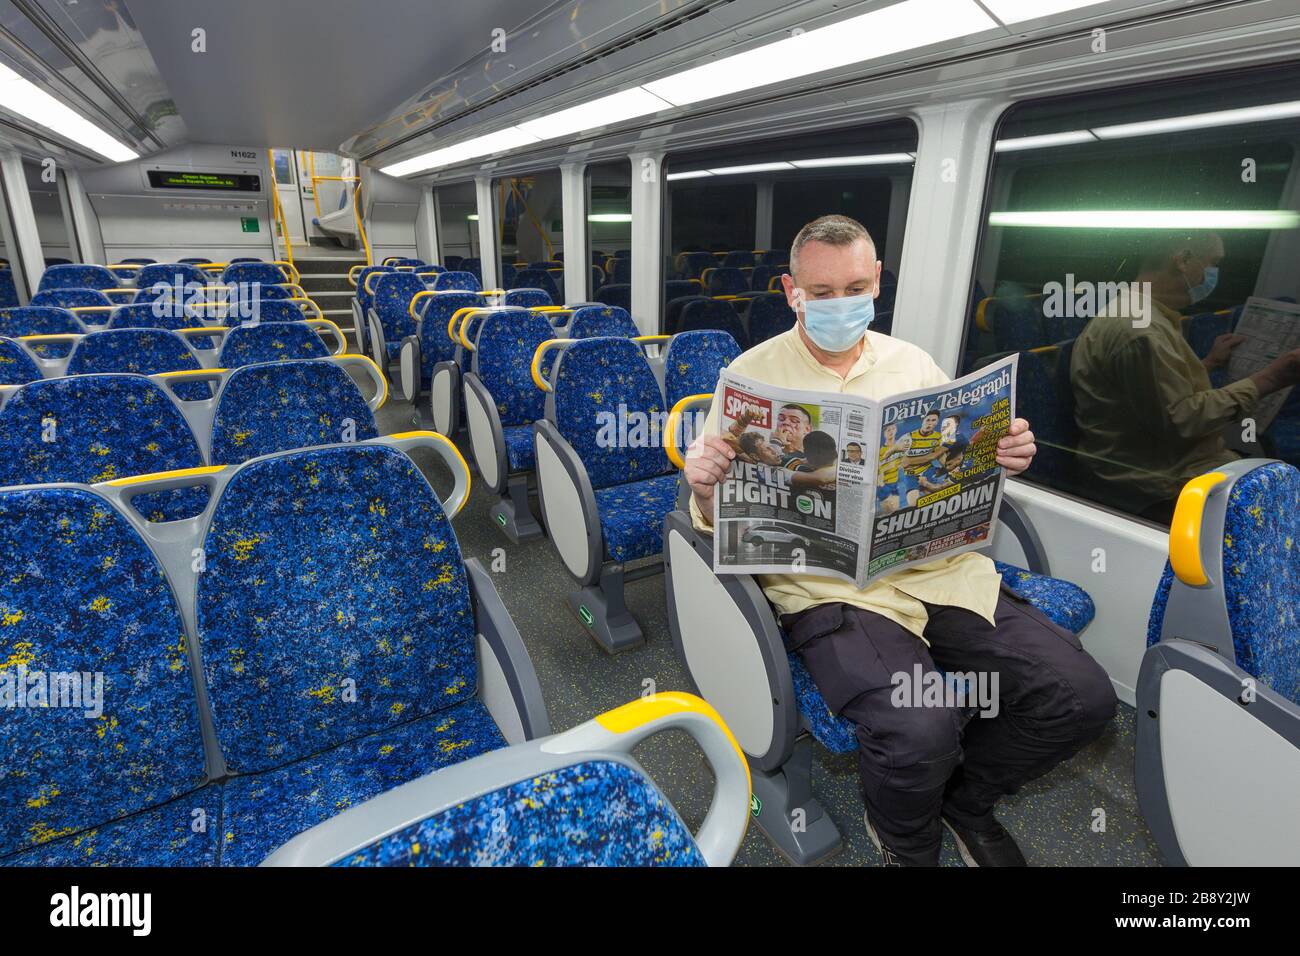 23 March, 2020: A lone man on an empty train reads Coronavirus news reports from the Daily Telegraph newspaper in Sydney, Australia, as the population abandons public places in anticipation of a city-wide lockdown. From midday today, many businesses and gathering places classified by the government as non-essential - such as pubs, restaurants, beaches, and even places of worship - have been deemed off-limits until further notice. Credit: Robert Wallace / Wallace Media Network / Alamy Live News. Stock Photo